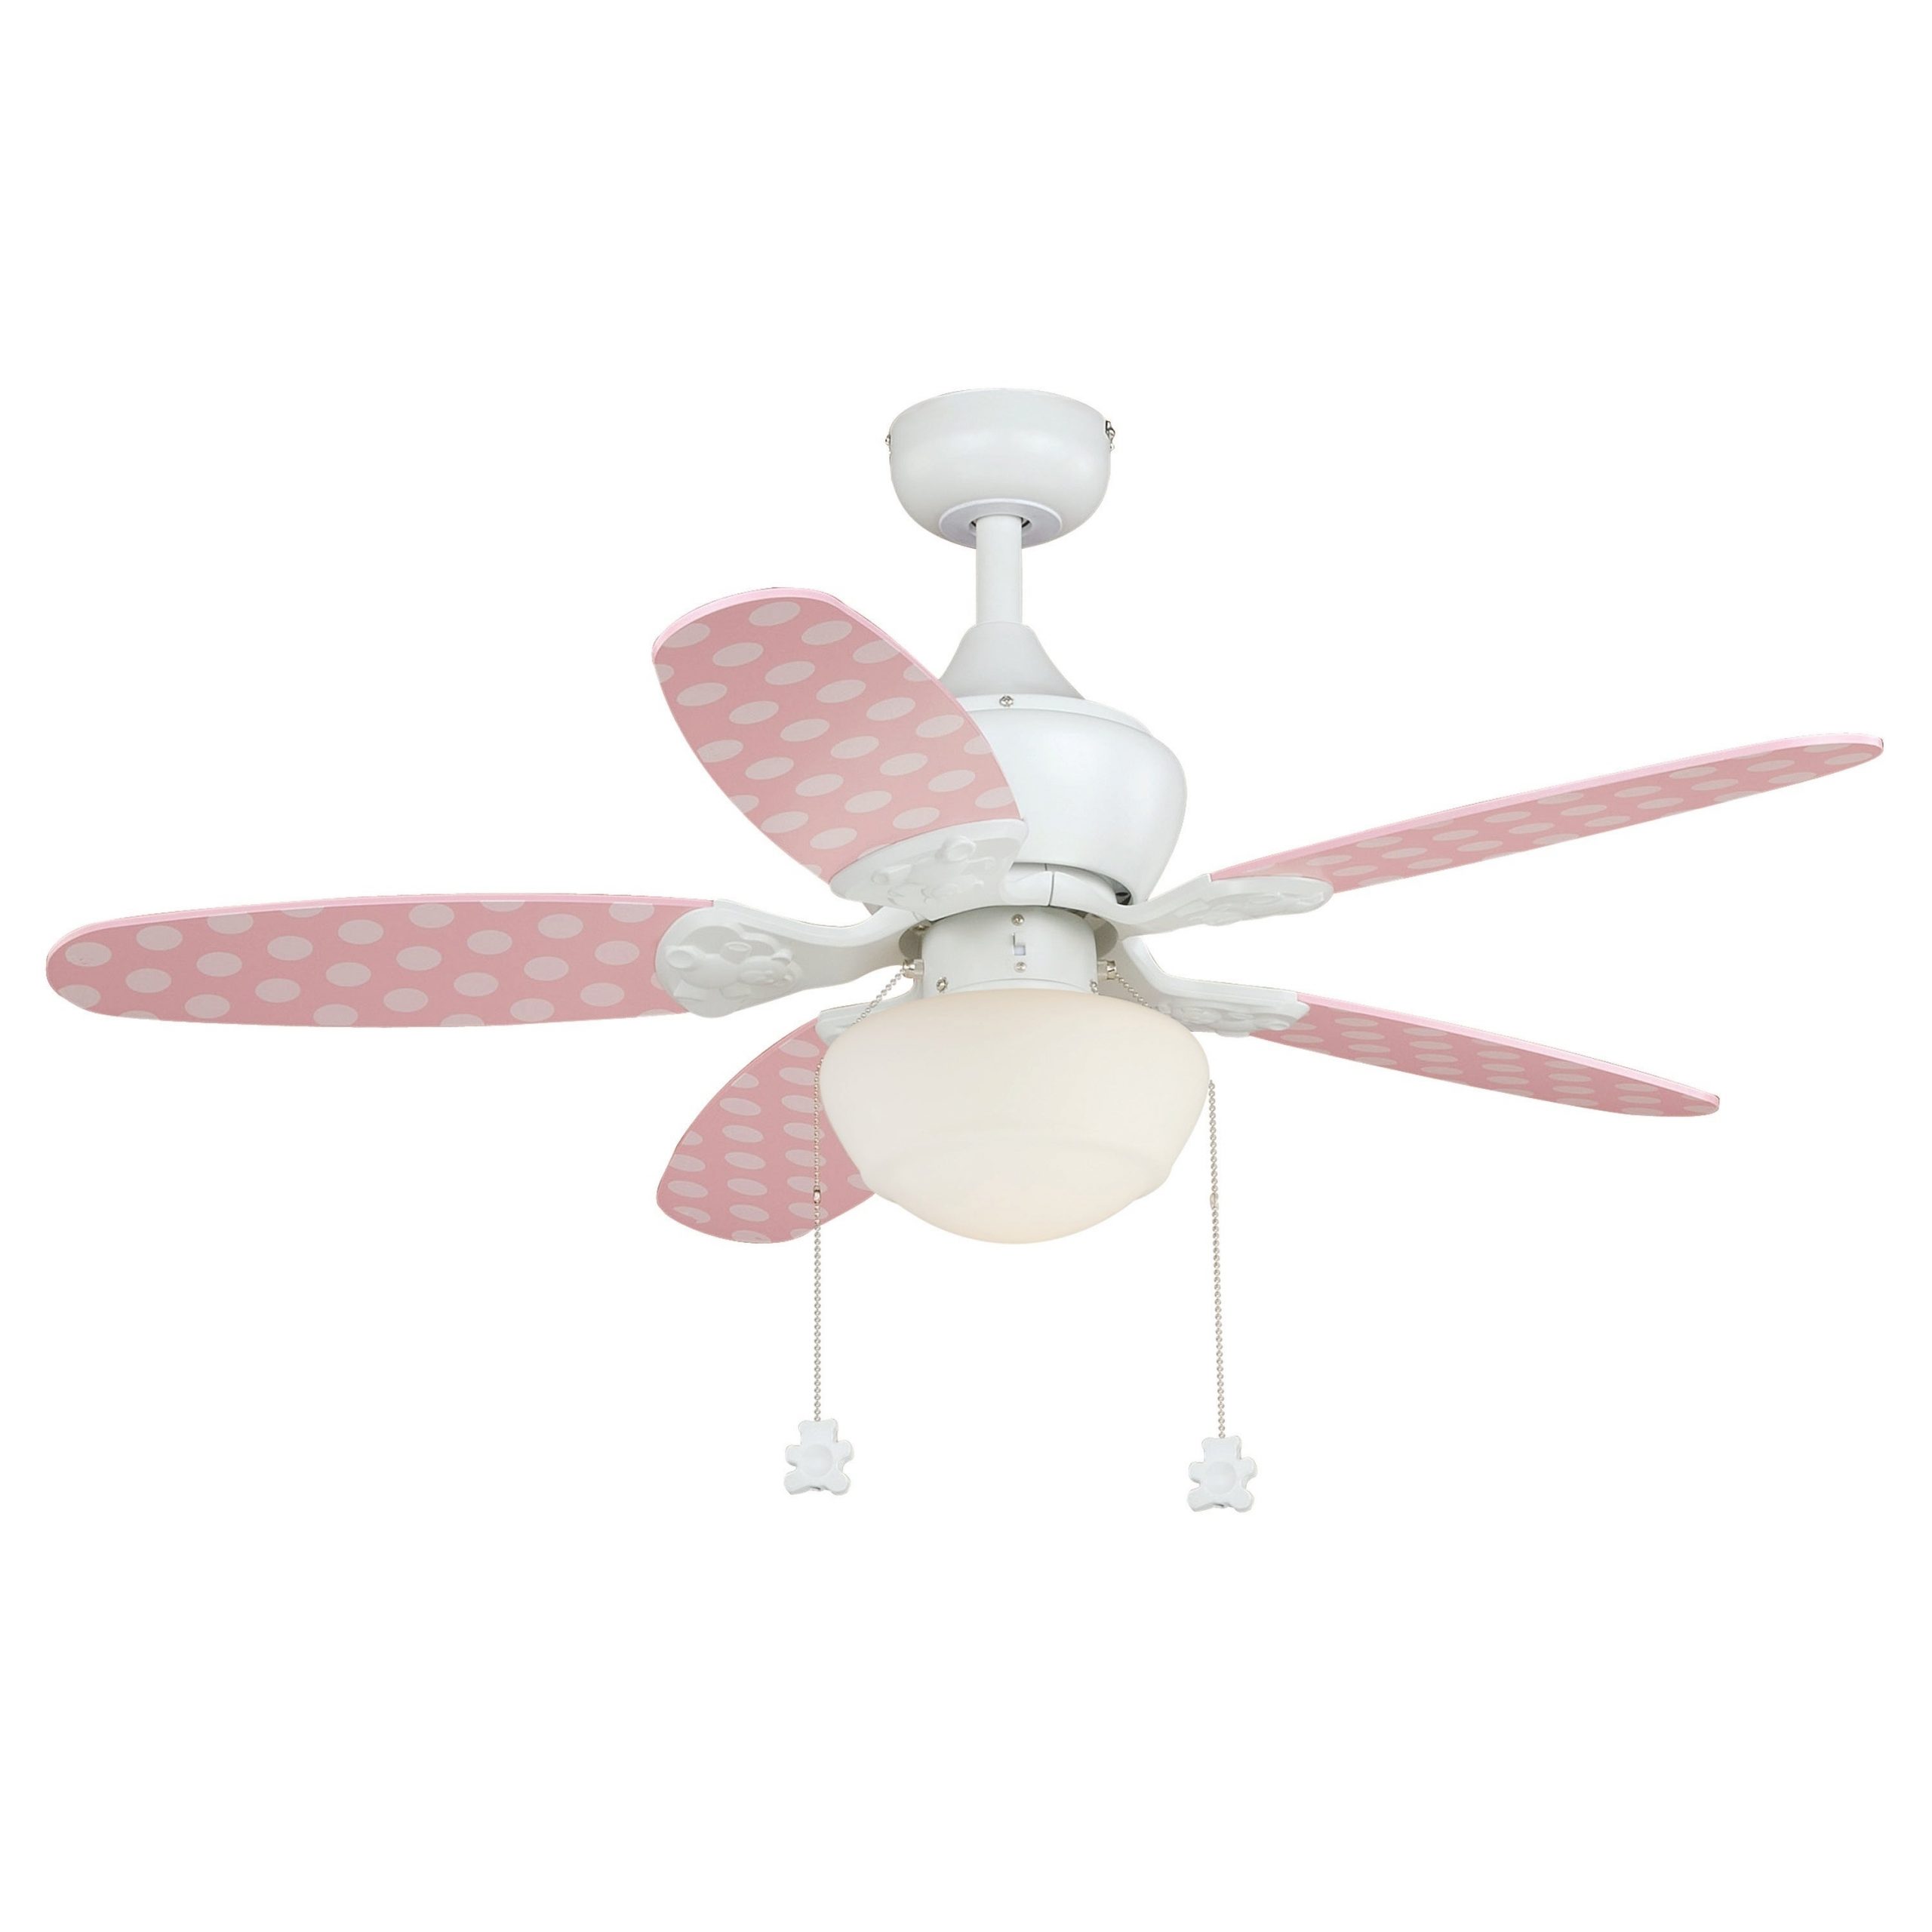 Alex Childrens 44 Inch Girls Pink Polka Dot And White Led Ceiling Fan With Light Kit 44 In W X 205 In H X 44 In D intended for proportions 3000 X 3000